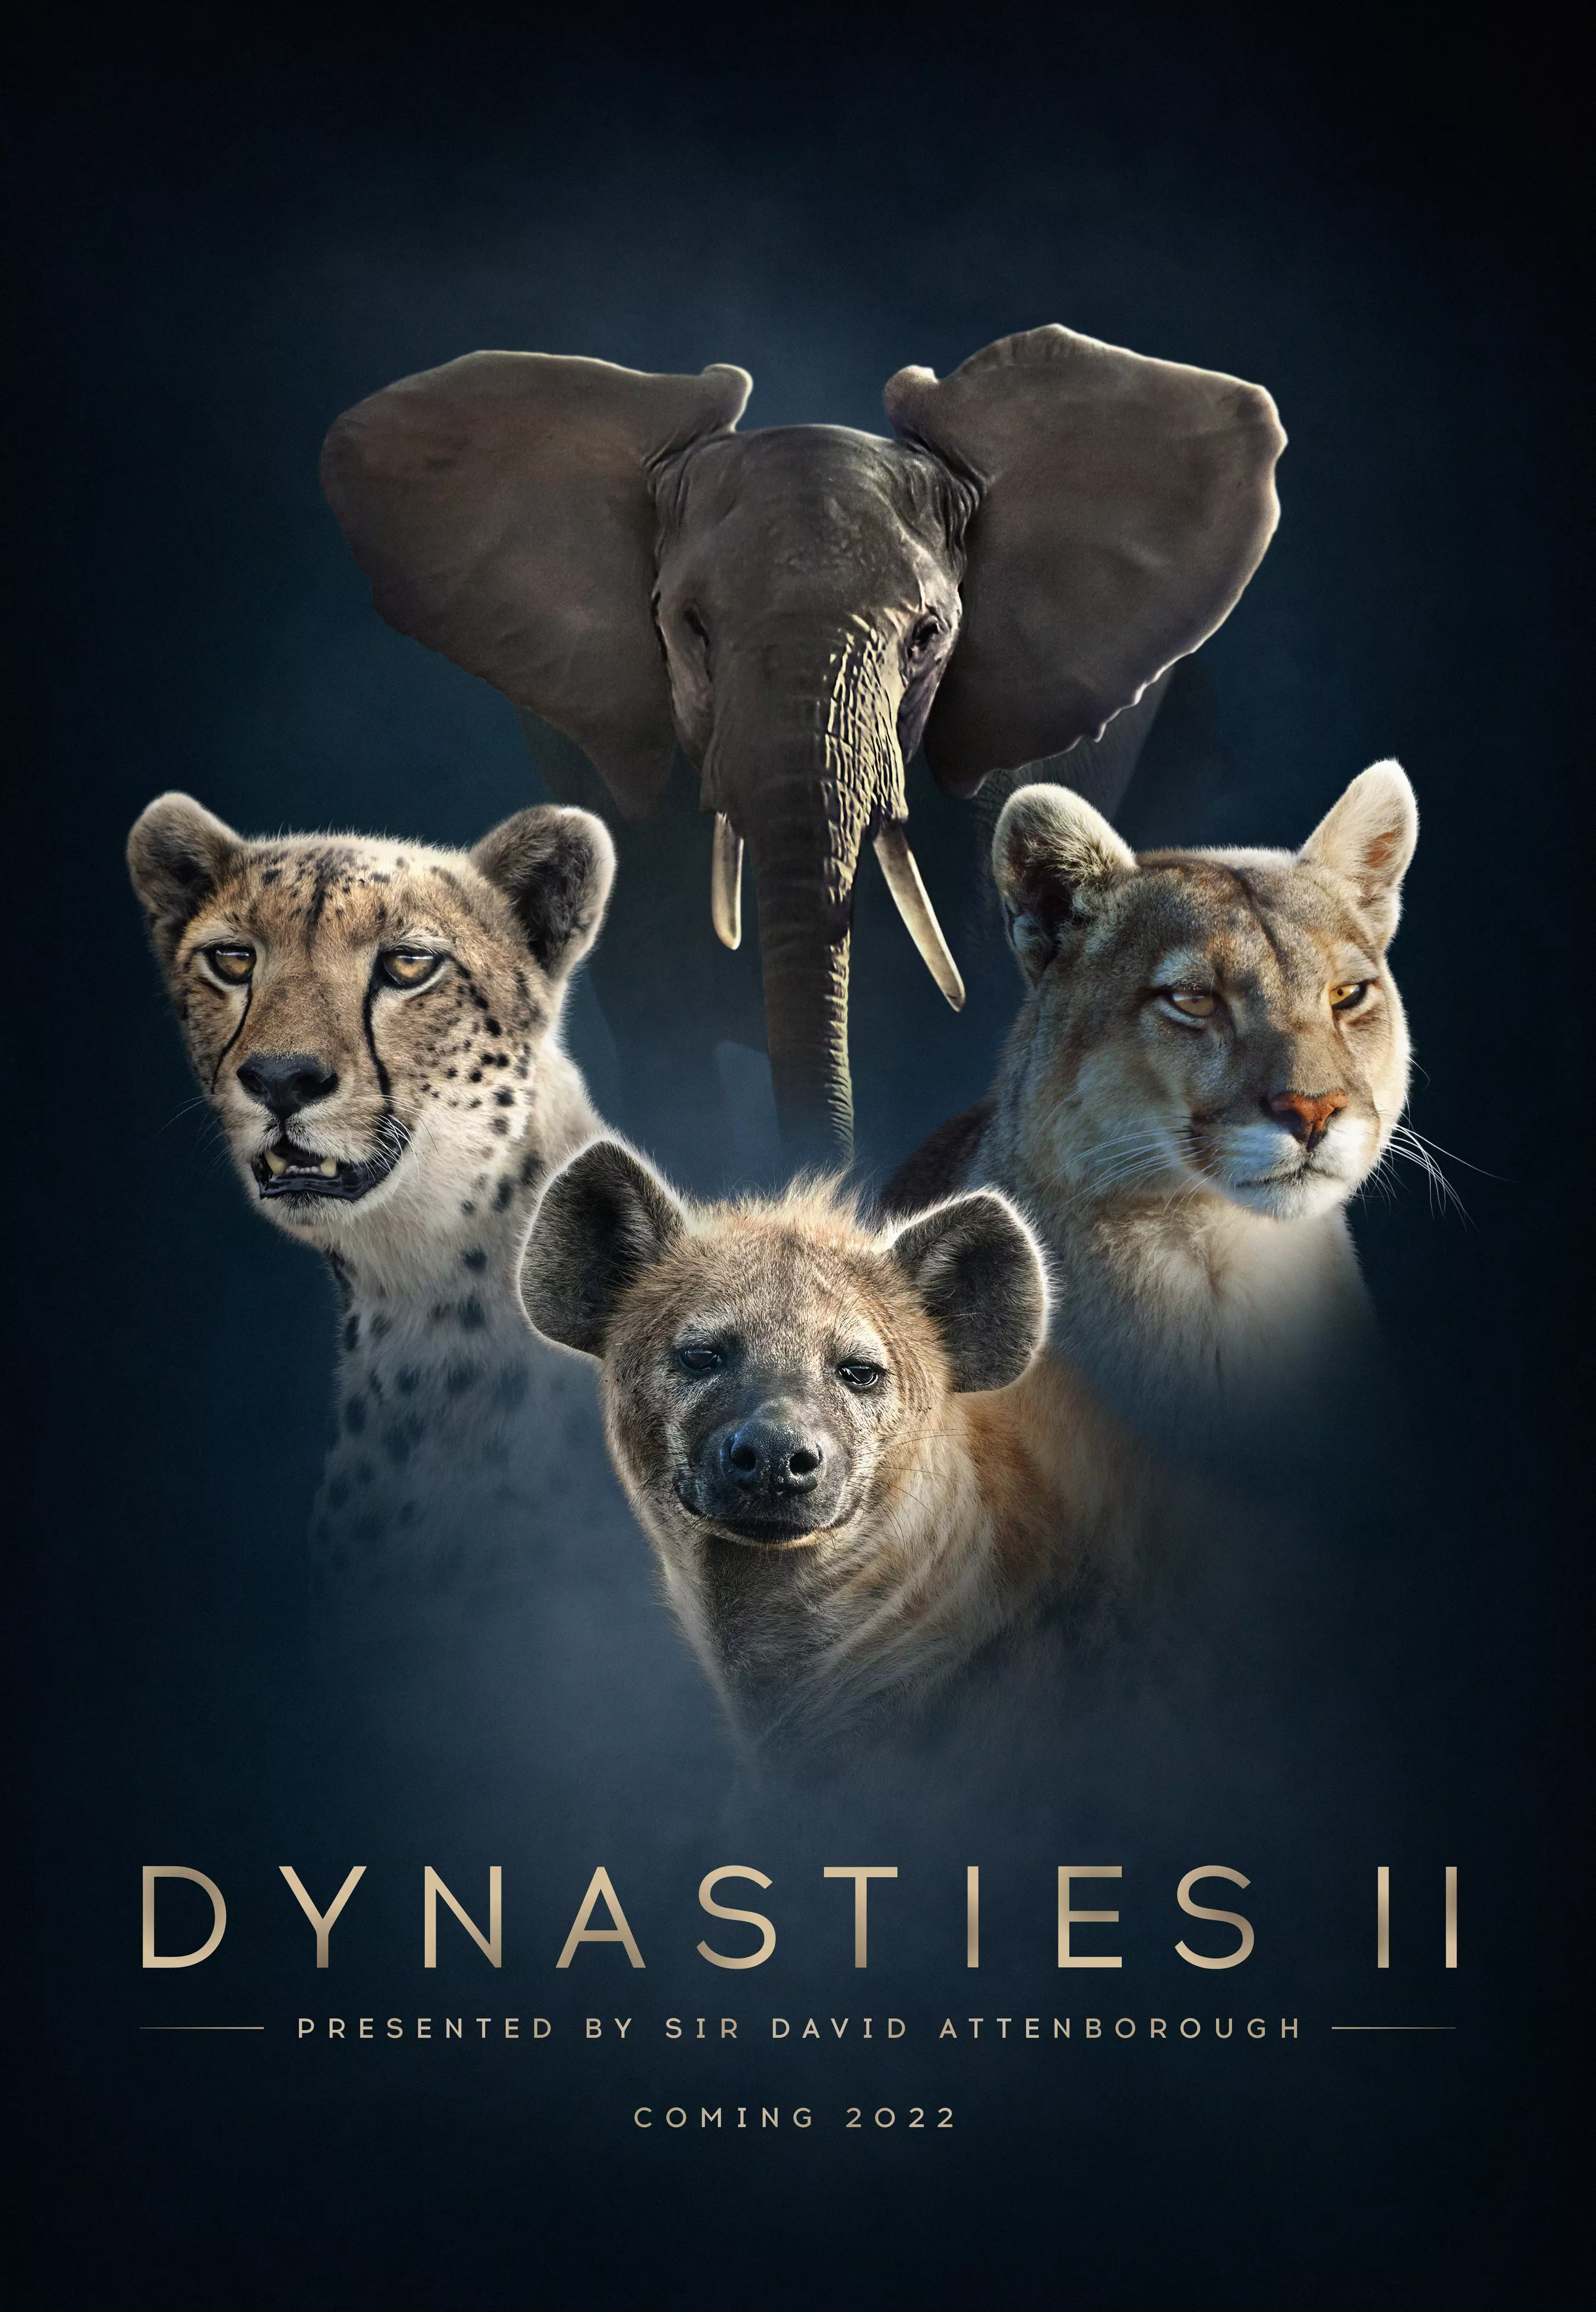 Dynasties is returning for a second series.